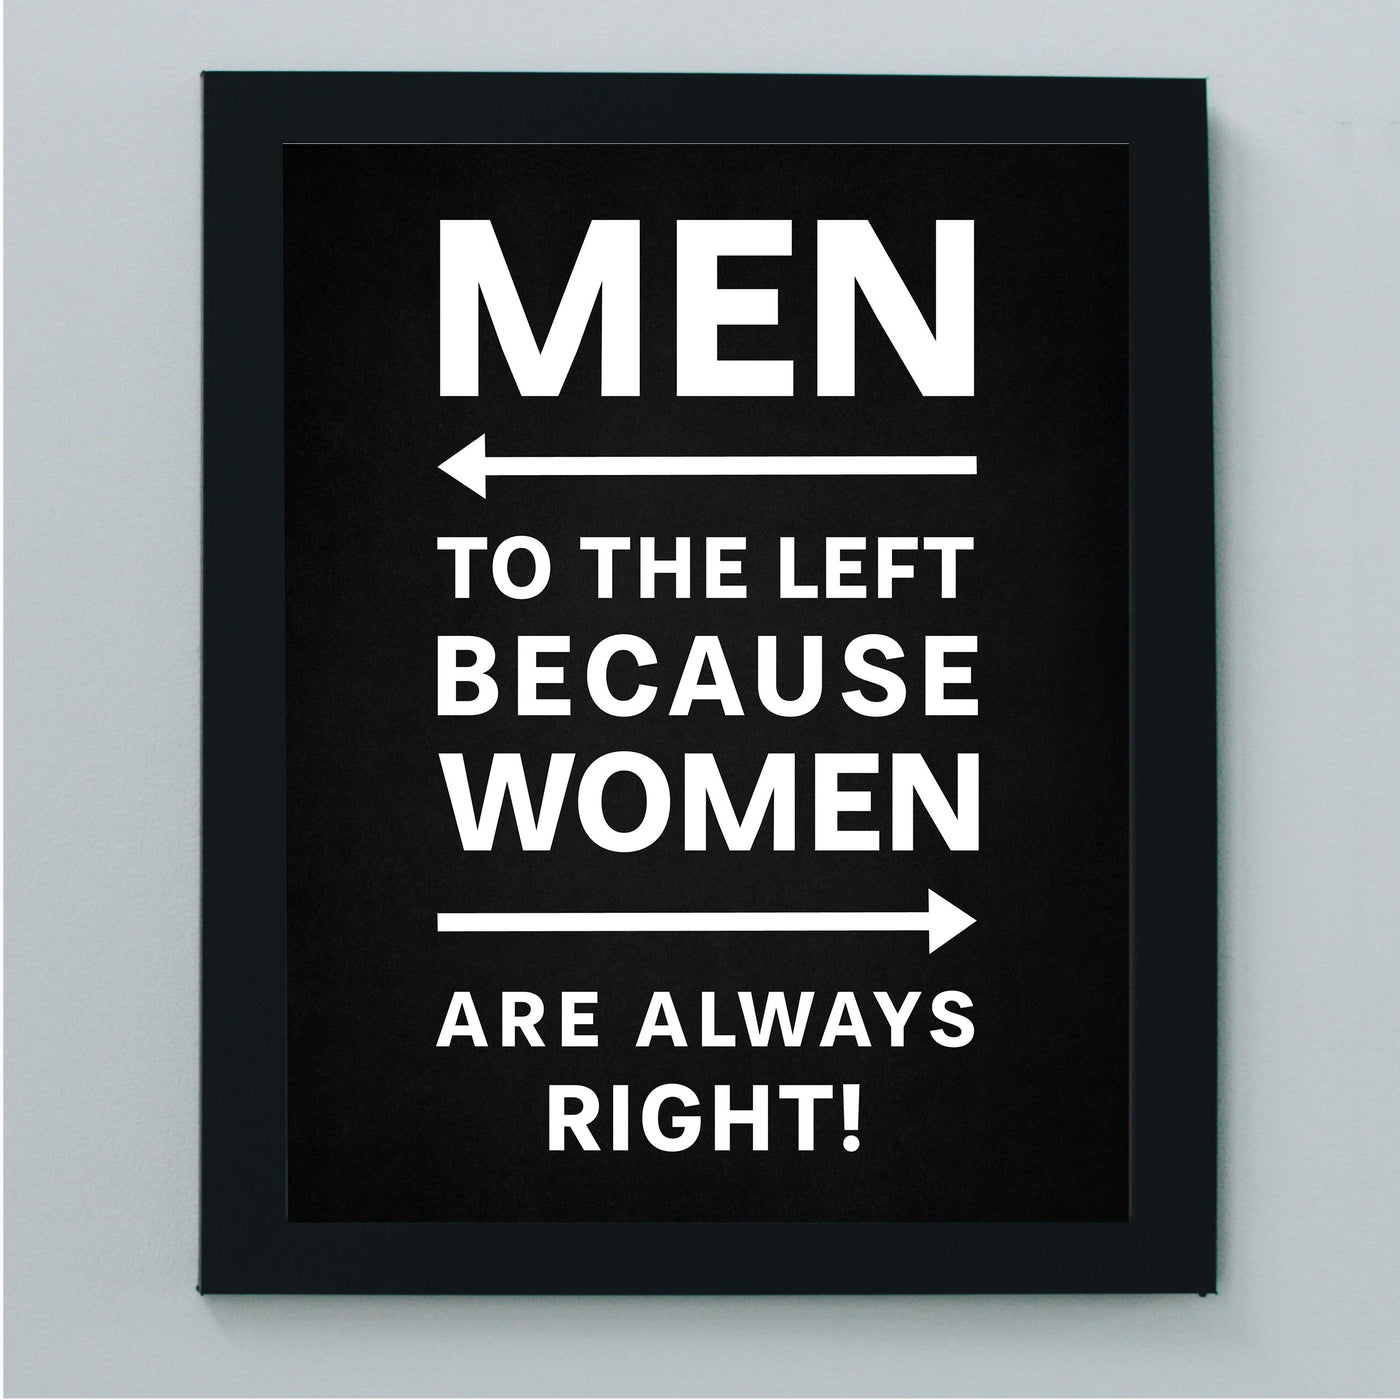 Men to the Left Because Women Are Always Right Funny Wall Decor-8 x 10" Sarcastic Art Print-Ready to Frame. Modern Design. Humorous Home-Office-Bar-Shop-Cave Decor. Great Novelty Sign & Fun Gift!